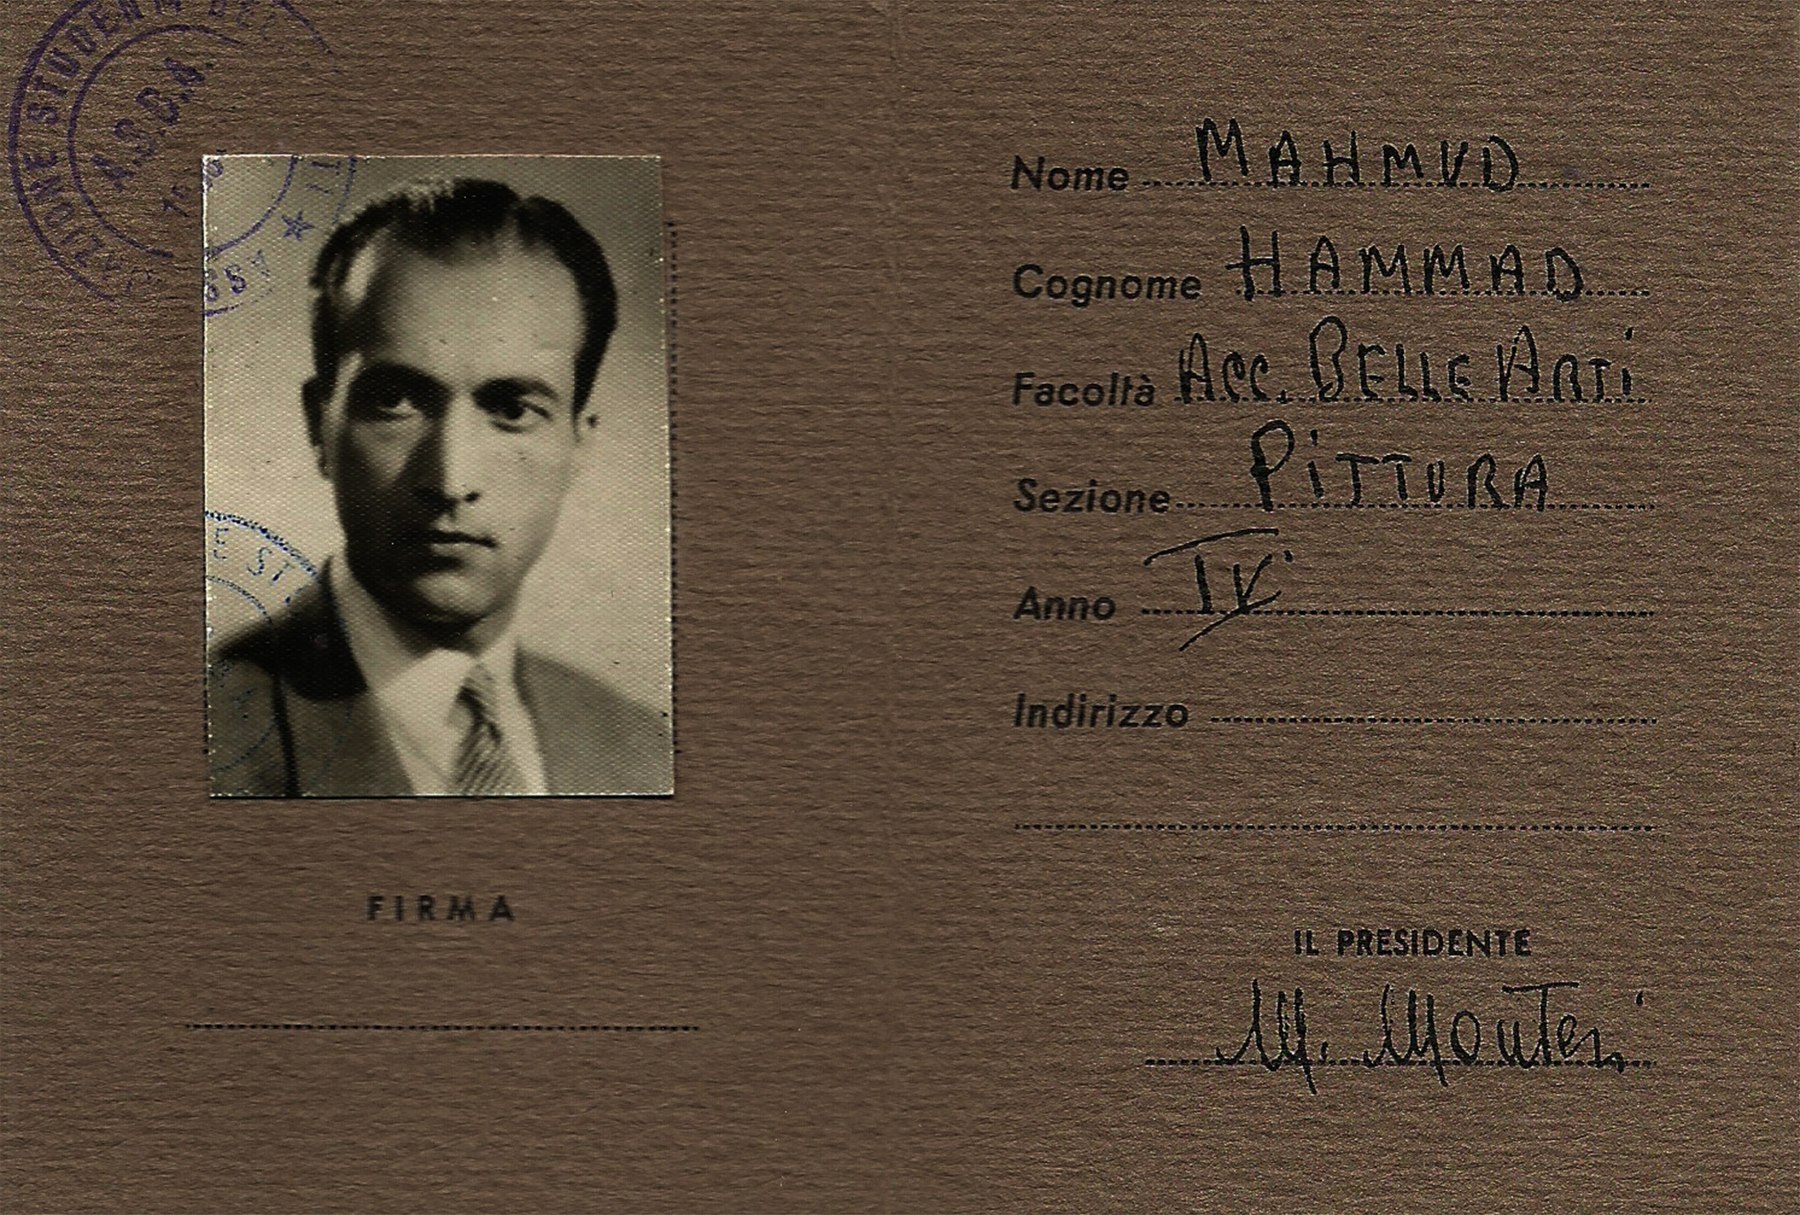 The Archives of Mahmoud Hammad - MASA Collections - Atassi Foundation